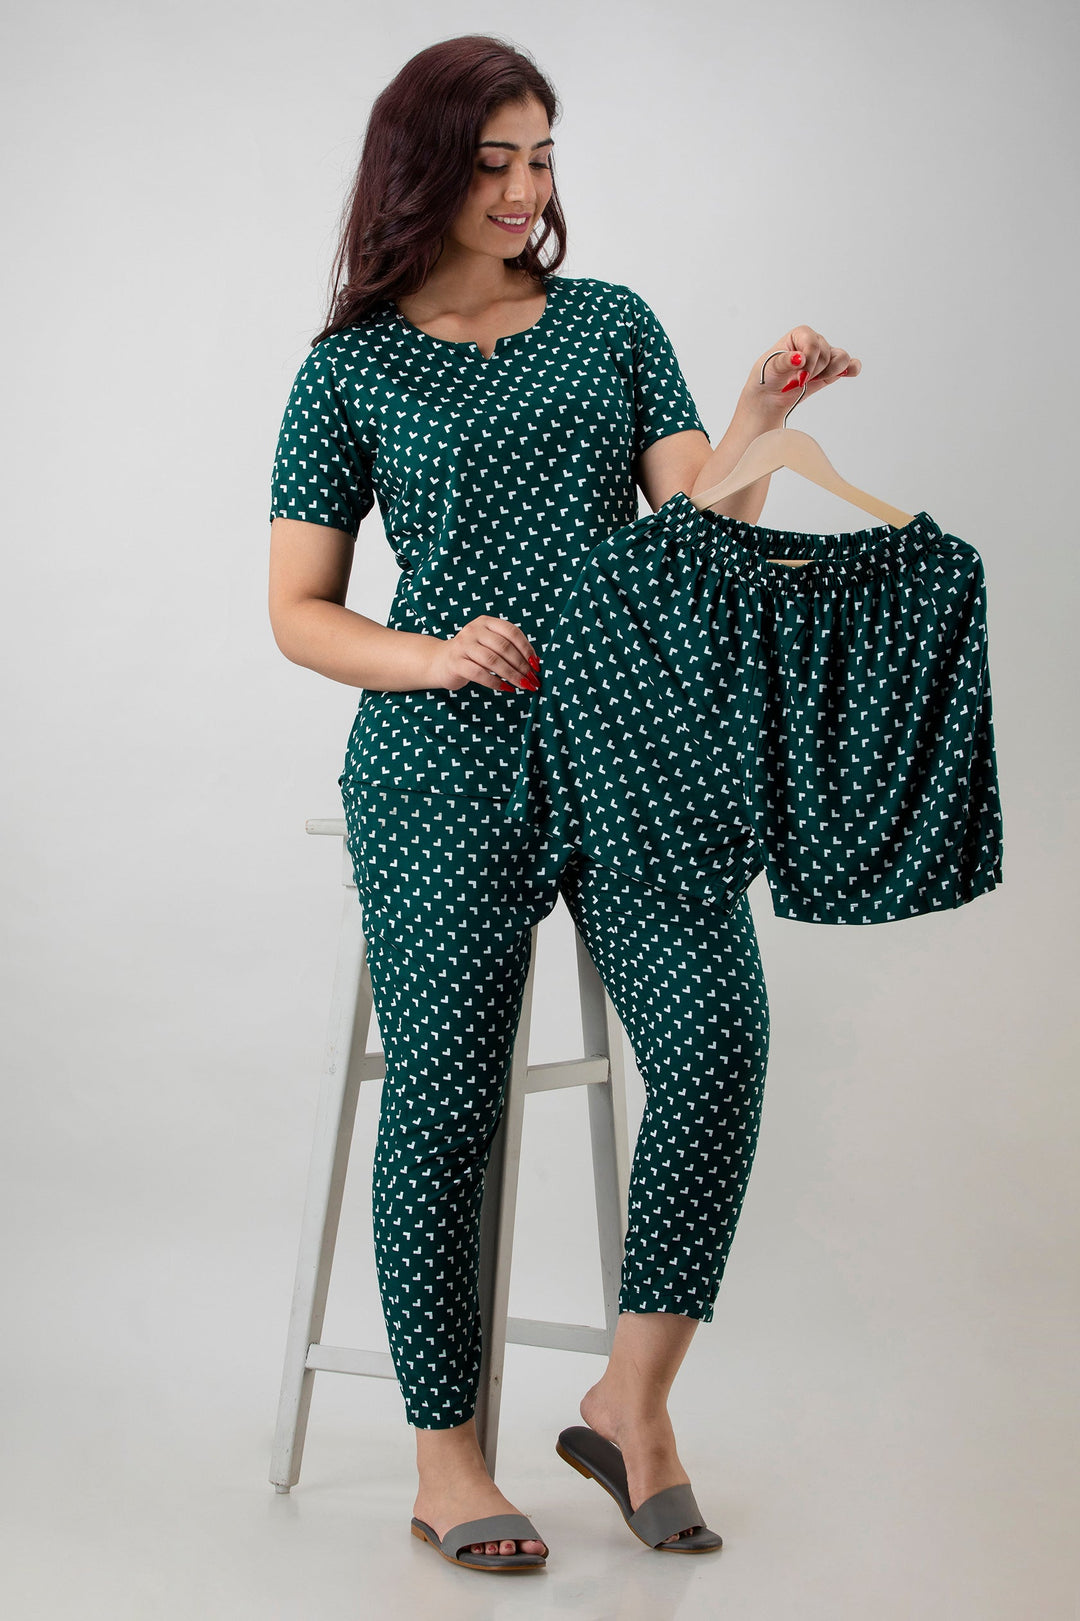 Bottle Green Rayon Shirt and Pant Night Suit